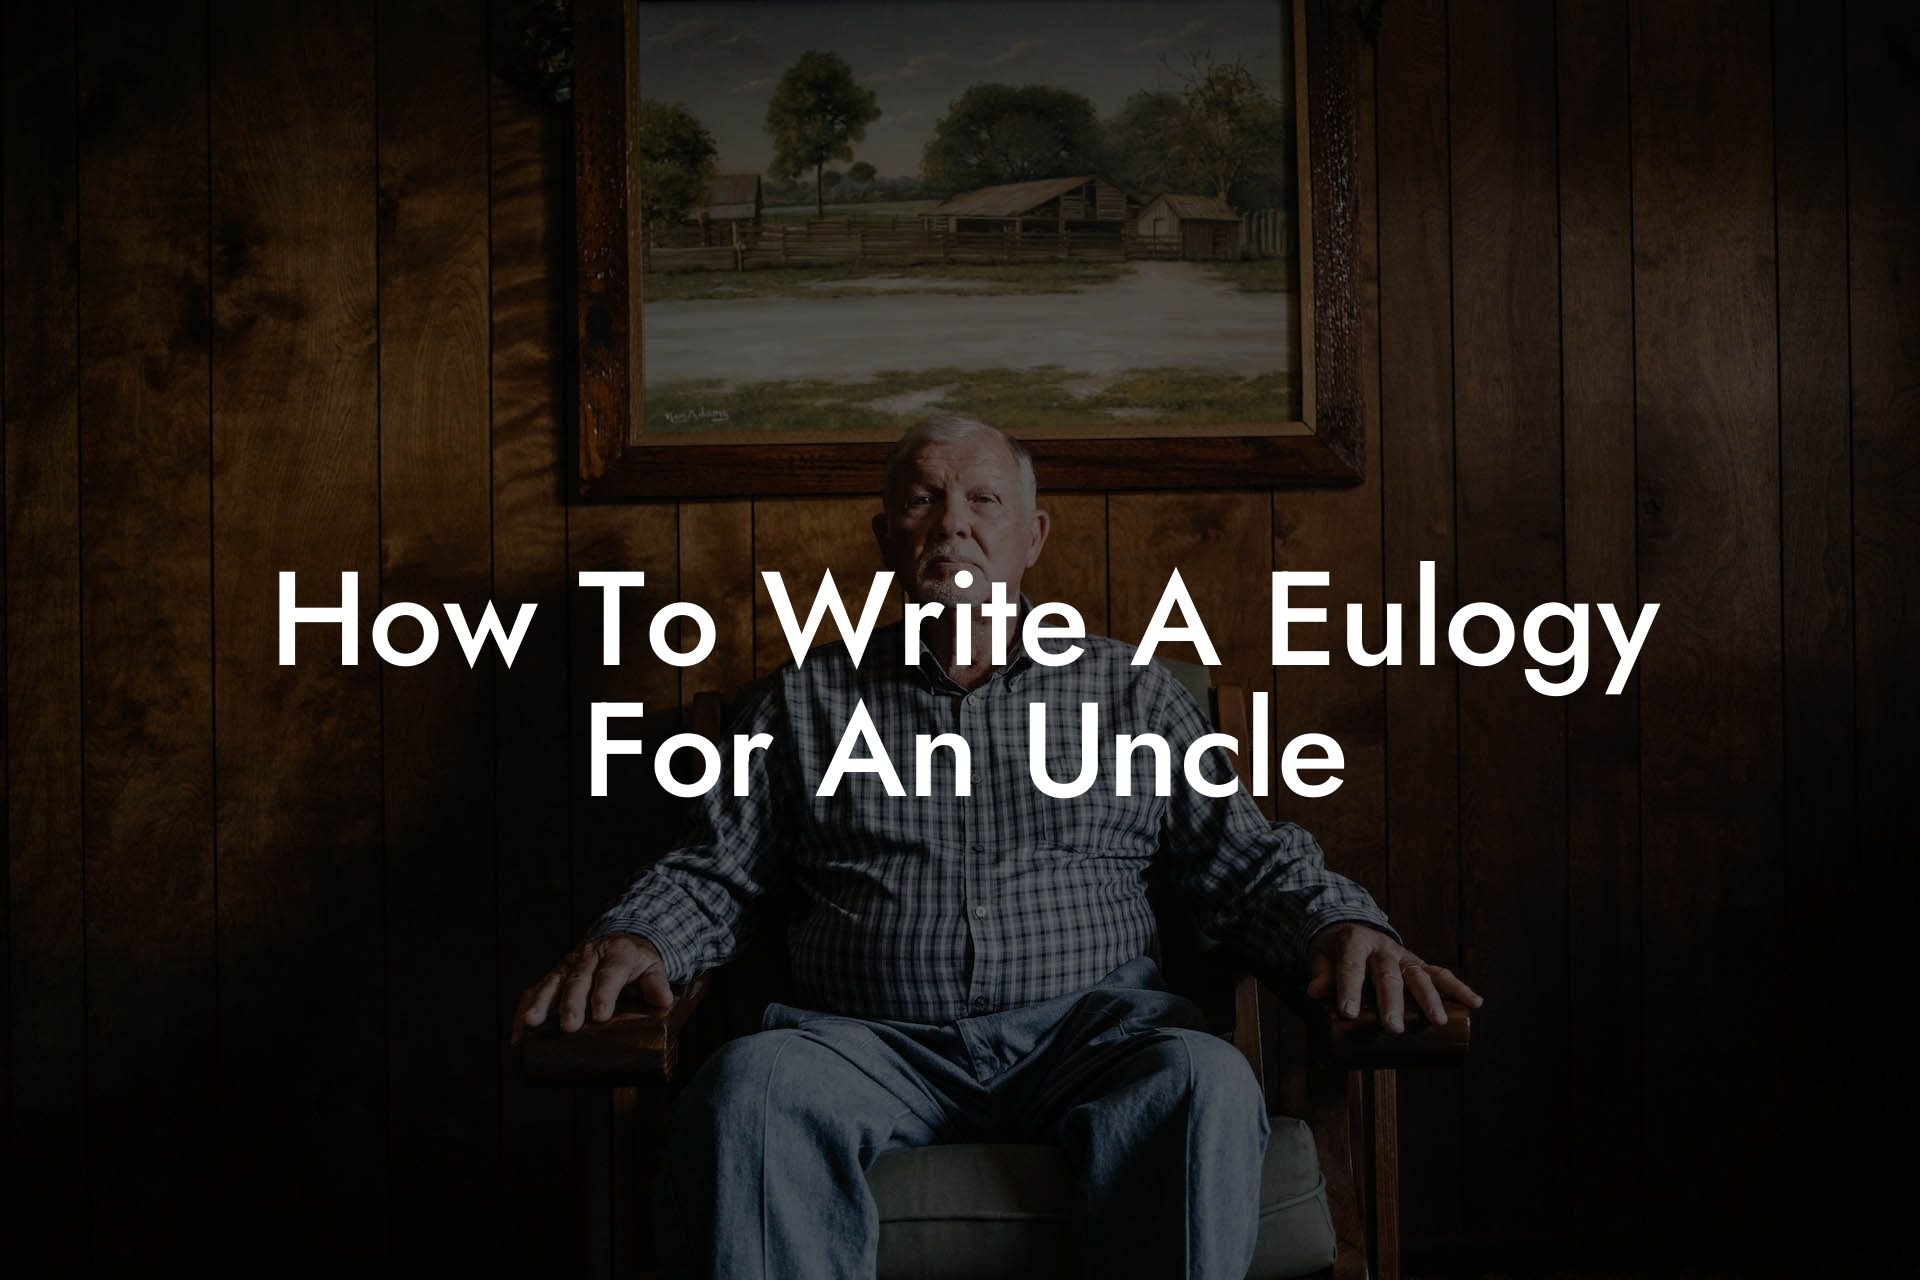 How To Write A Eulogy For An Uncle